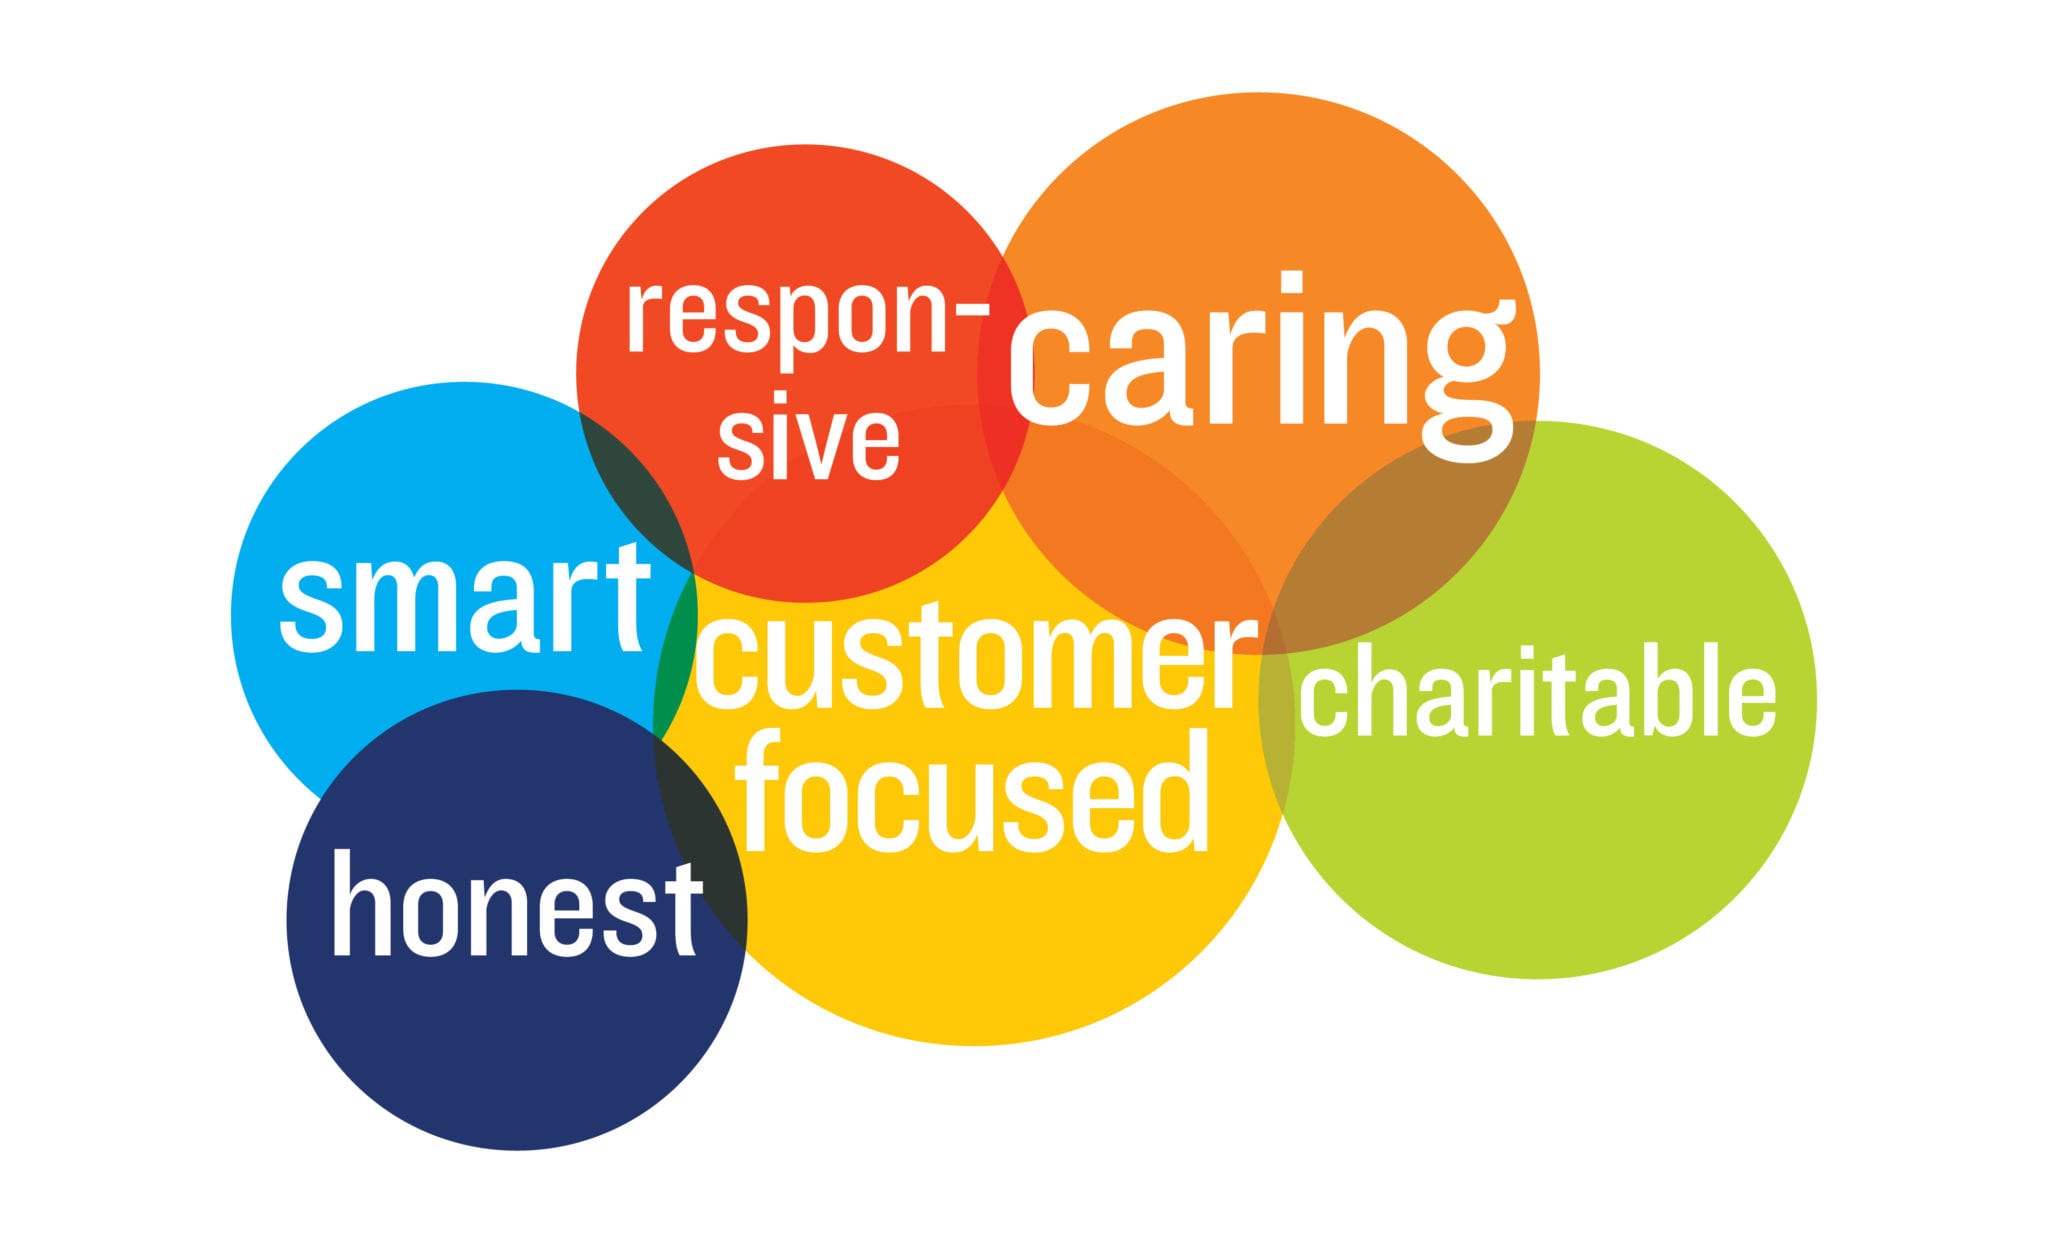 Colorful venn diagram with the words honest, caring, giving, responsive, charitiable overlapping the words customer focused